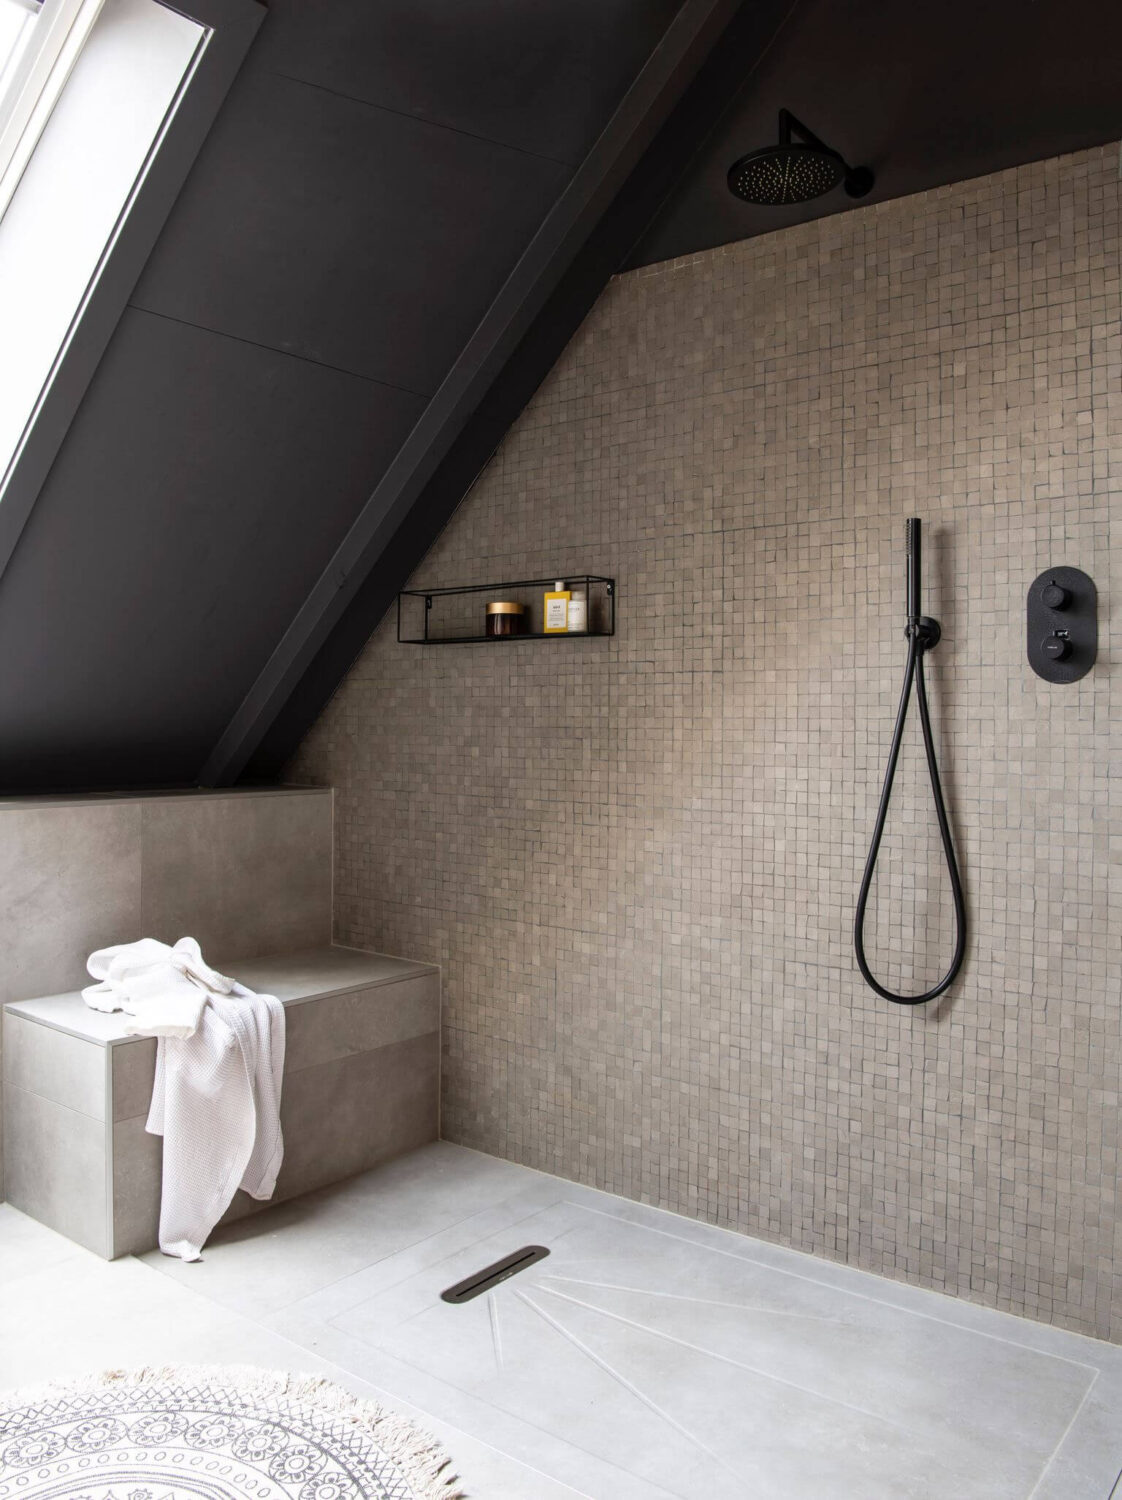 large-walk-in-shower-slanted-ceiling-country-house-nordroom